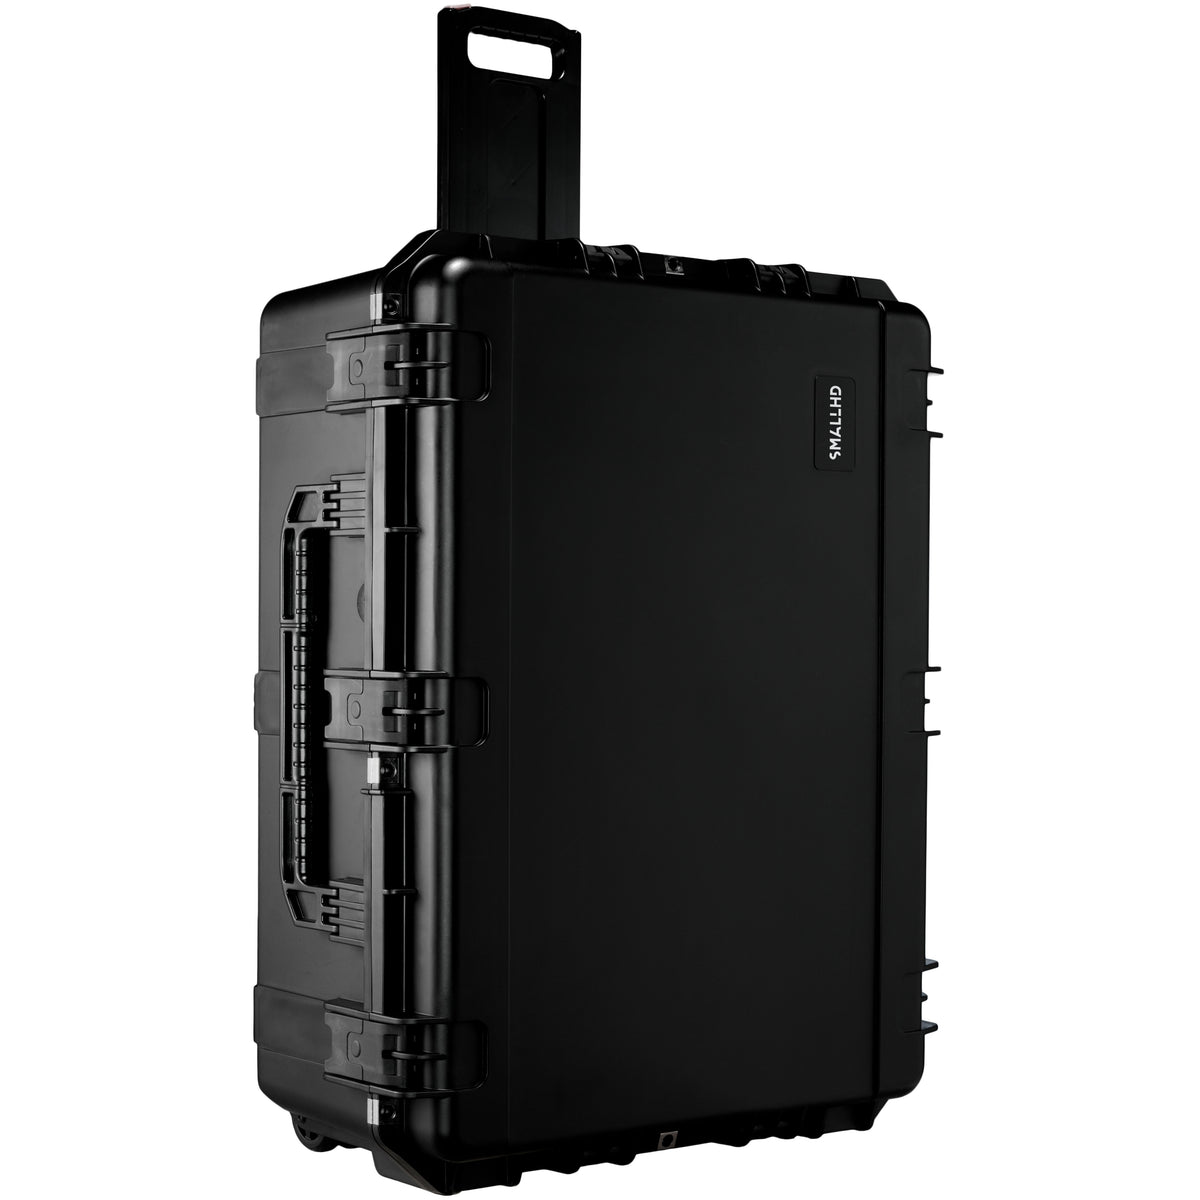 SmallHD Small Hard-Shell Case for 5 or 7 Monitor ACC-CASE-SMALL